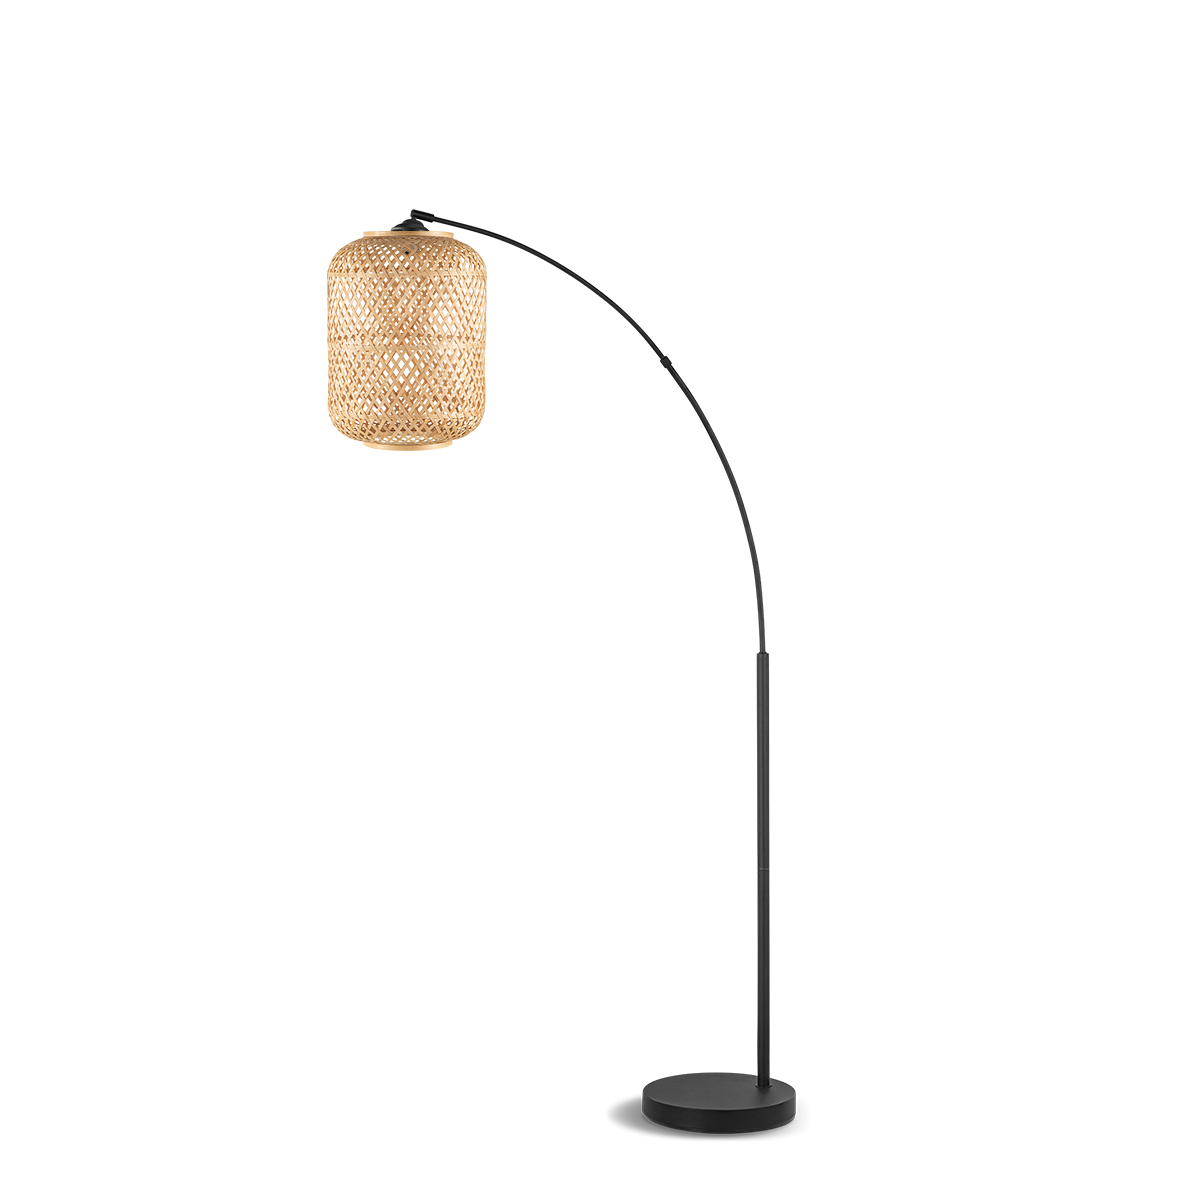 Tangla lighting - TLF7574-01LNT - LED Floor lamp 1 Light - metal and bamboo - natural and black - fischer pupa - E27